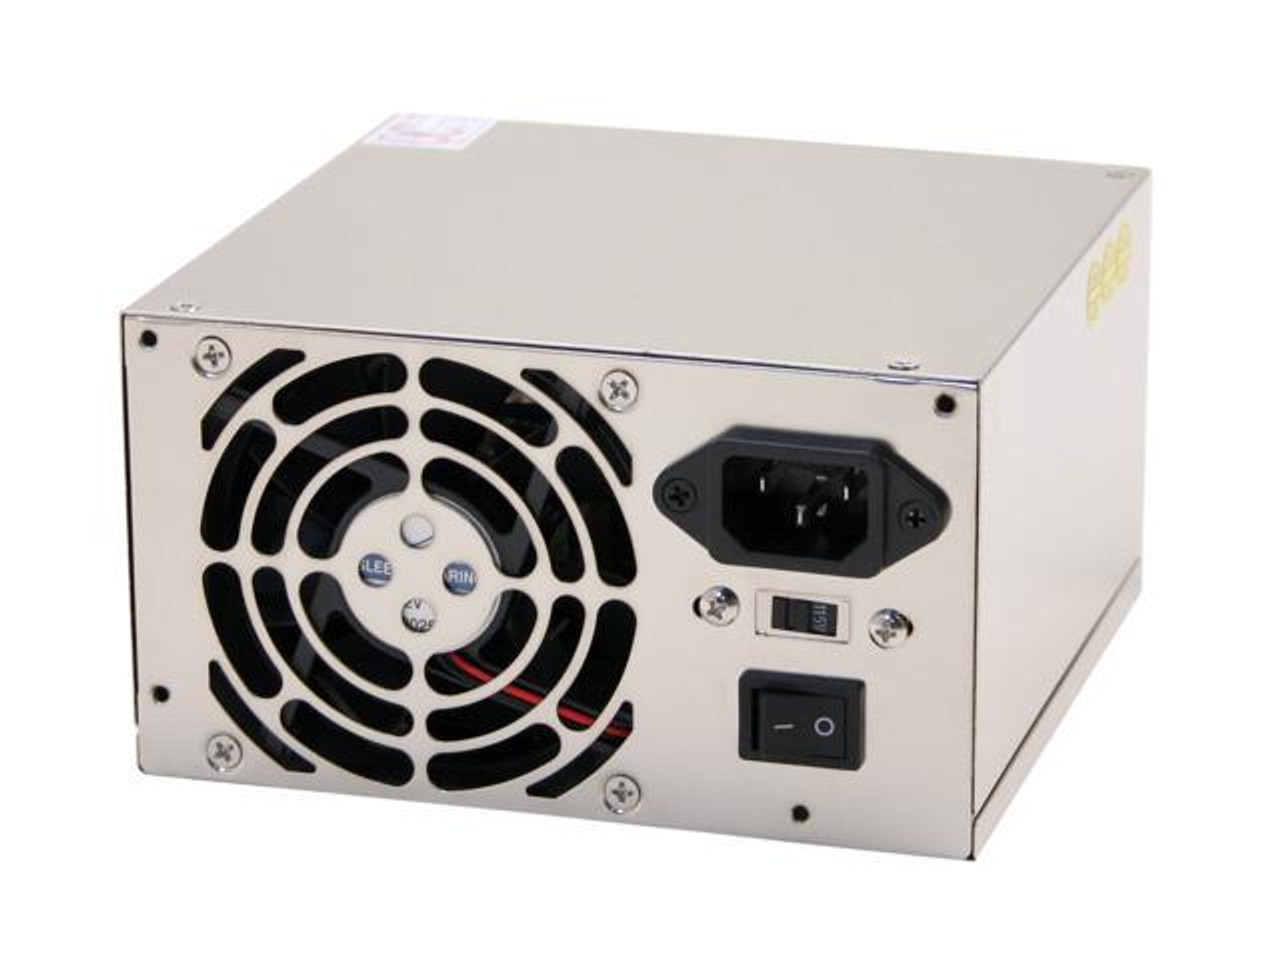 DPS-300AB-15 Gateway 300 Watts 20-Pin Power Supply for Gt5408, Gt5428